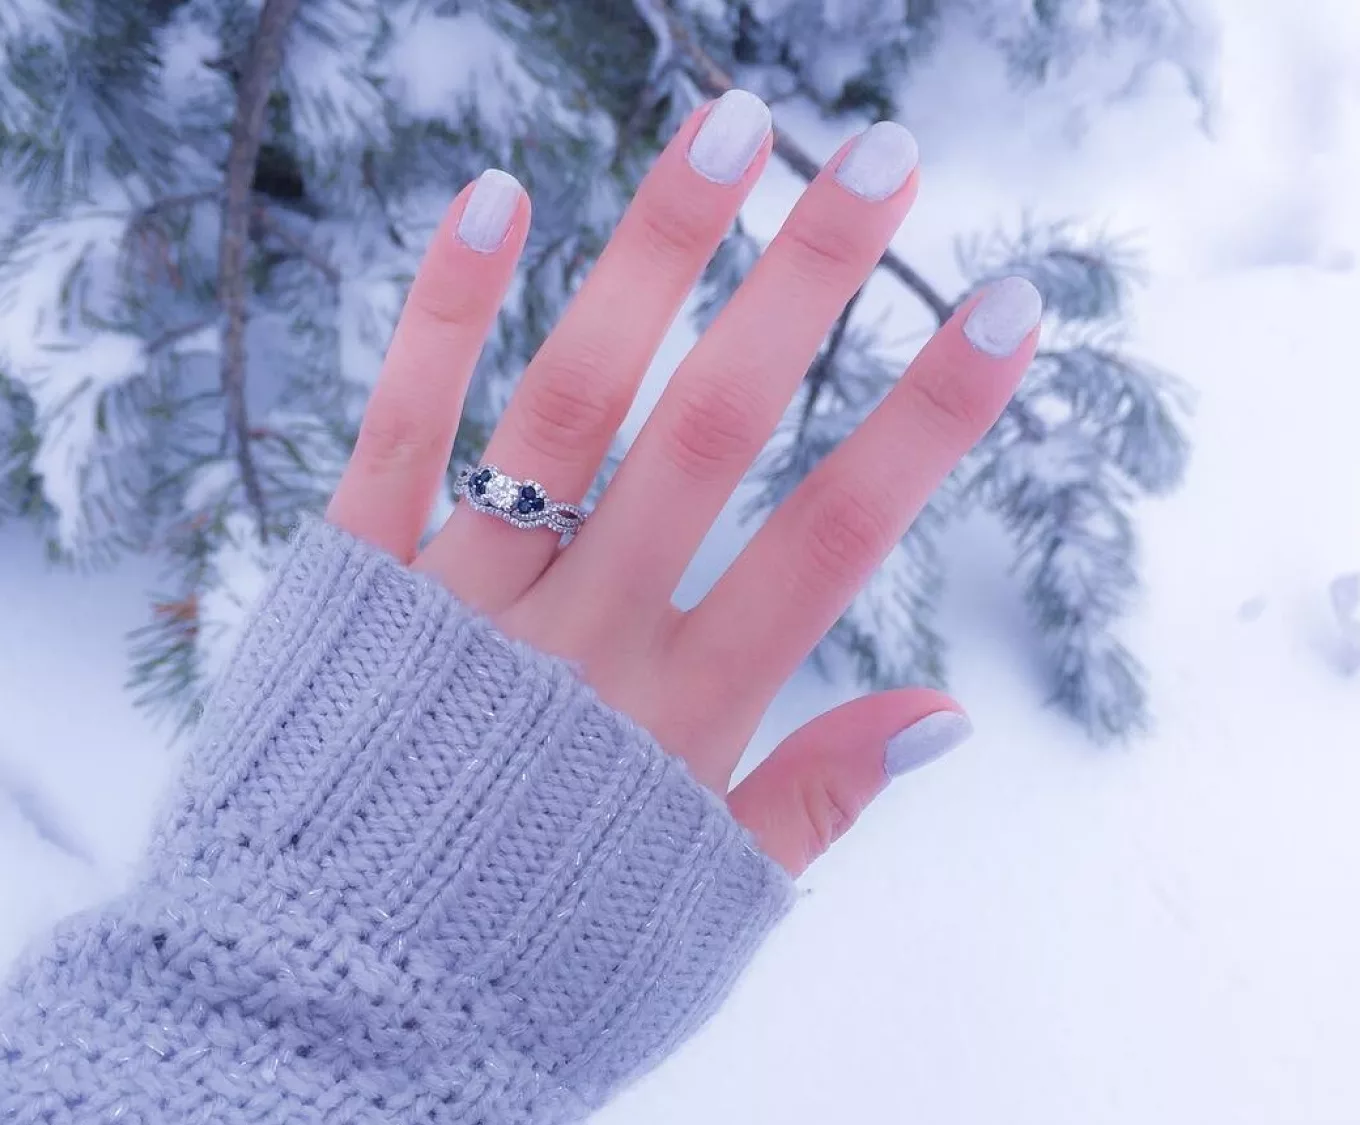 Snowy proposal Idea. Winter Proposal ideas. snowy proposal, woman showing off her engagement ring after a proposal in a snowy forest. @elenapetrovskiy

Round Sapphire and Diamond Wedding Set with Pave Setting
Add sparkle, color, and romance to your center gemstone with this gorgeous wedding set. natural diamonds are said to represent love, strength, and health. The natural sapphires have been hand-matched by Tom Shane and his team for superior color and consistency. Added nickel, zinc, silver, and copper alloys produce a bright and bold shade of 14-karat white gold that is sure to impress. Wedding sets are a great way to ensure your wedding band will fit perfectly next to your engagement ring.